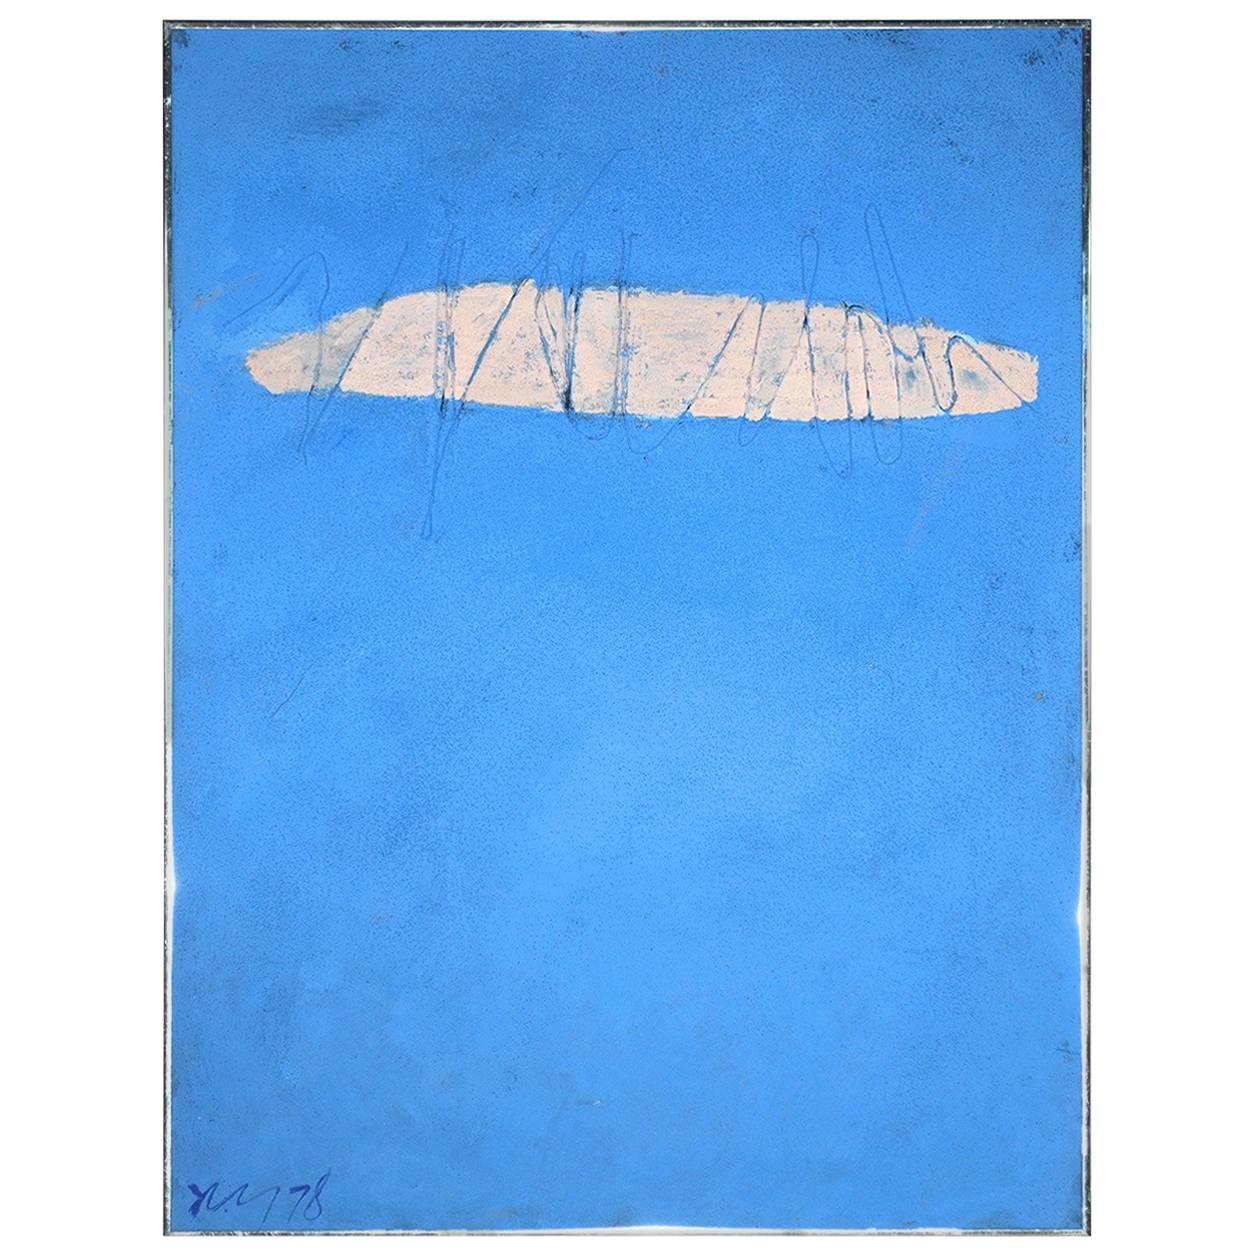 "Skywriting" Acrylic Painting by Adja Yunkers, 1978